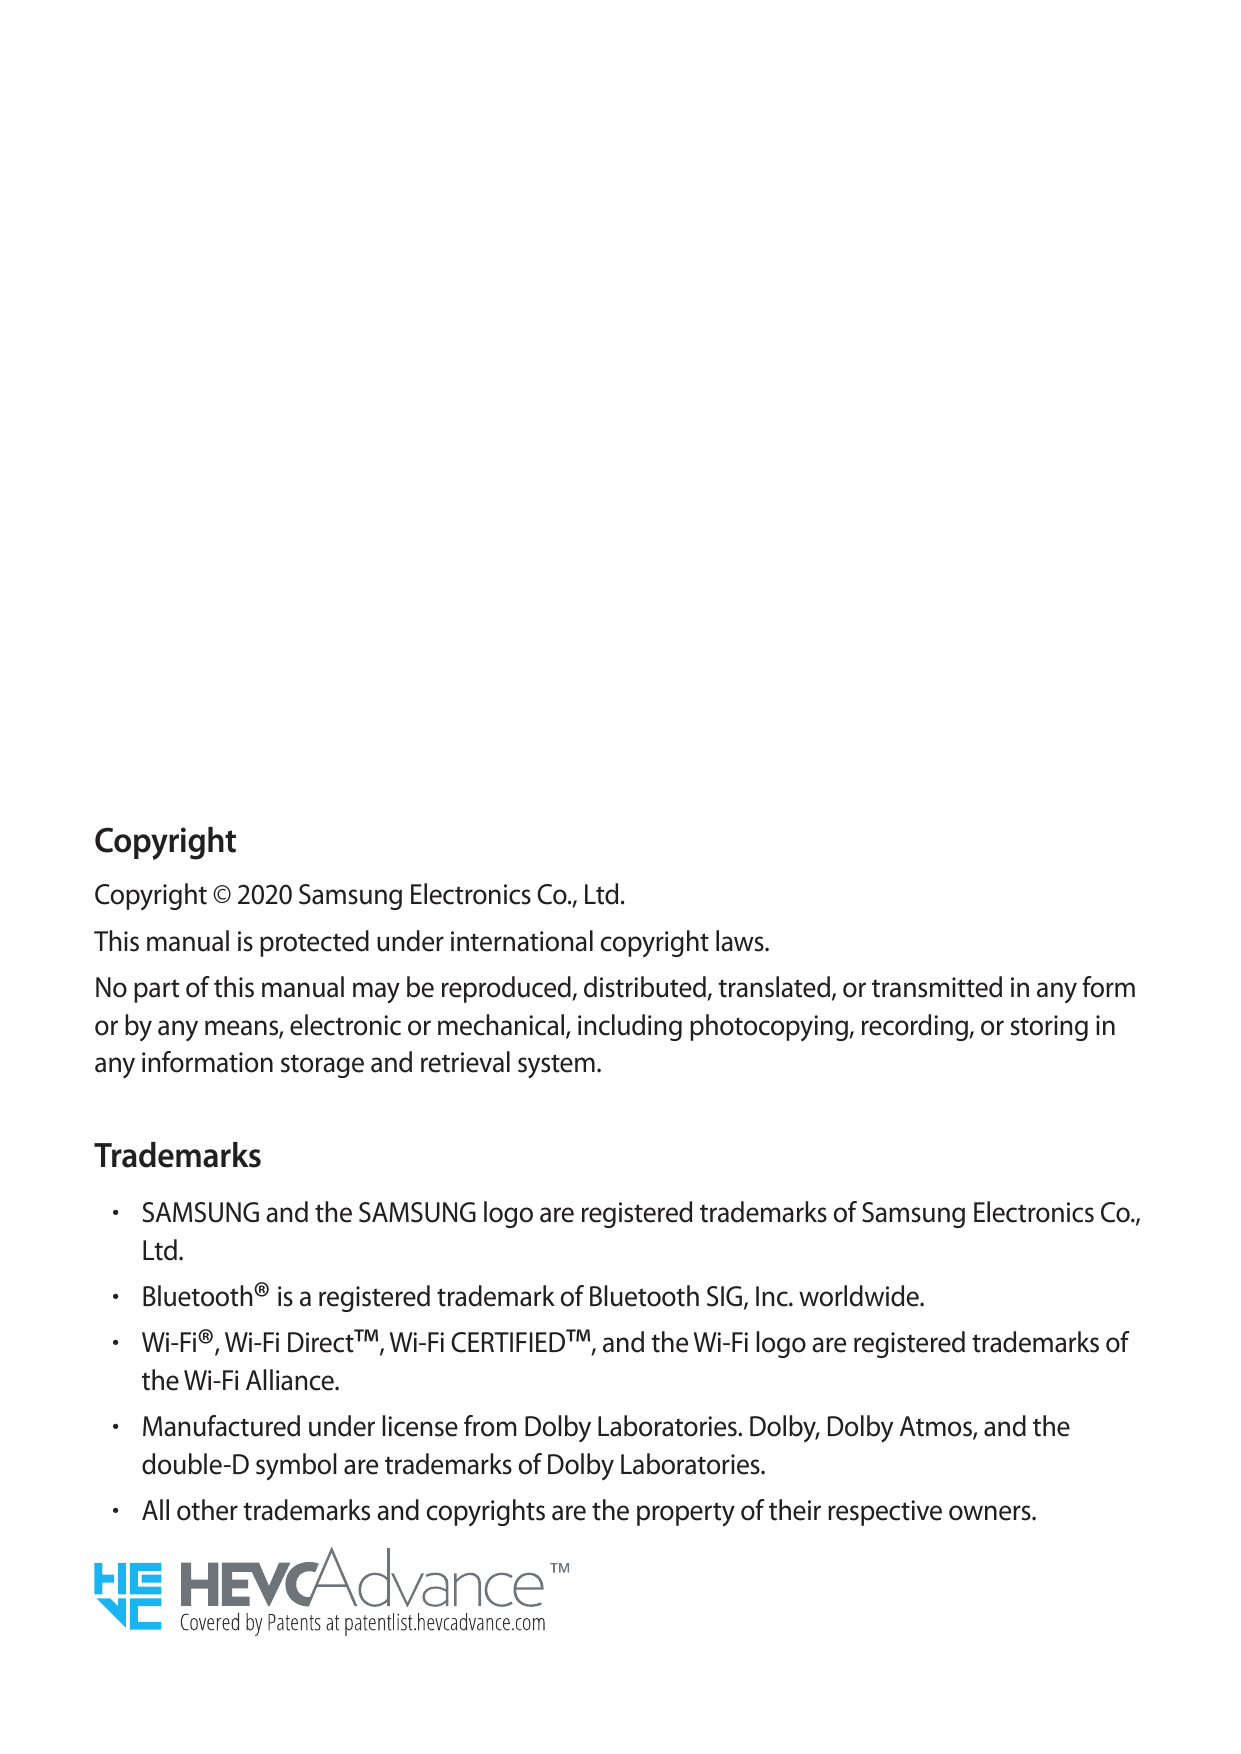 CopyrightCopyright © 2020 Samsung Electronics Co., Ltd.This manual is protected under international copyright laws.No part of th